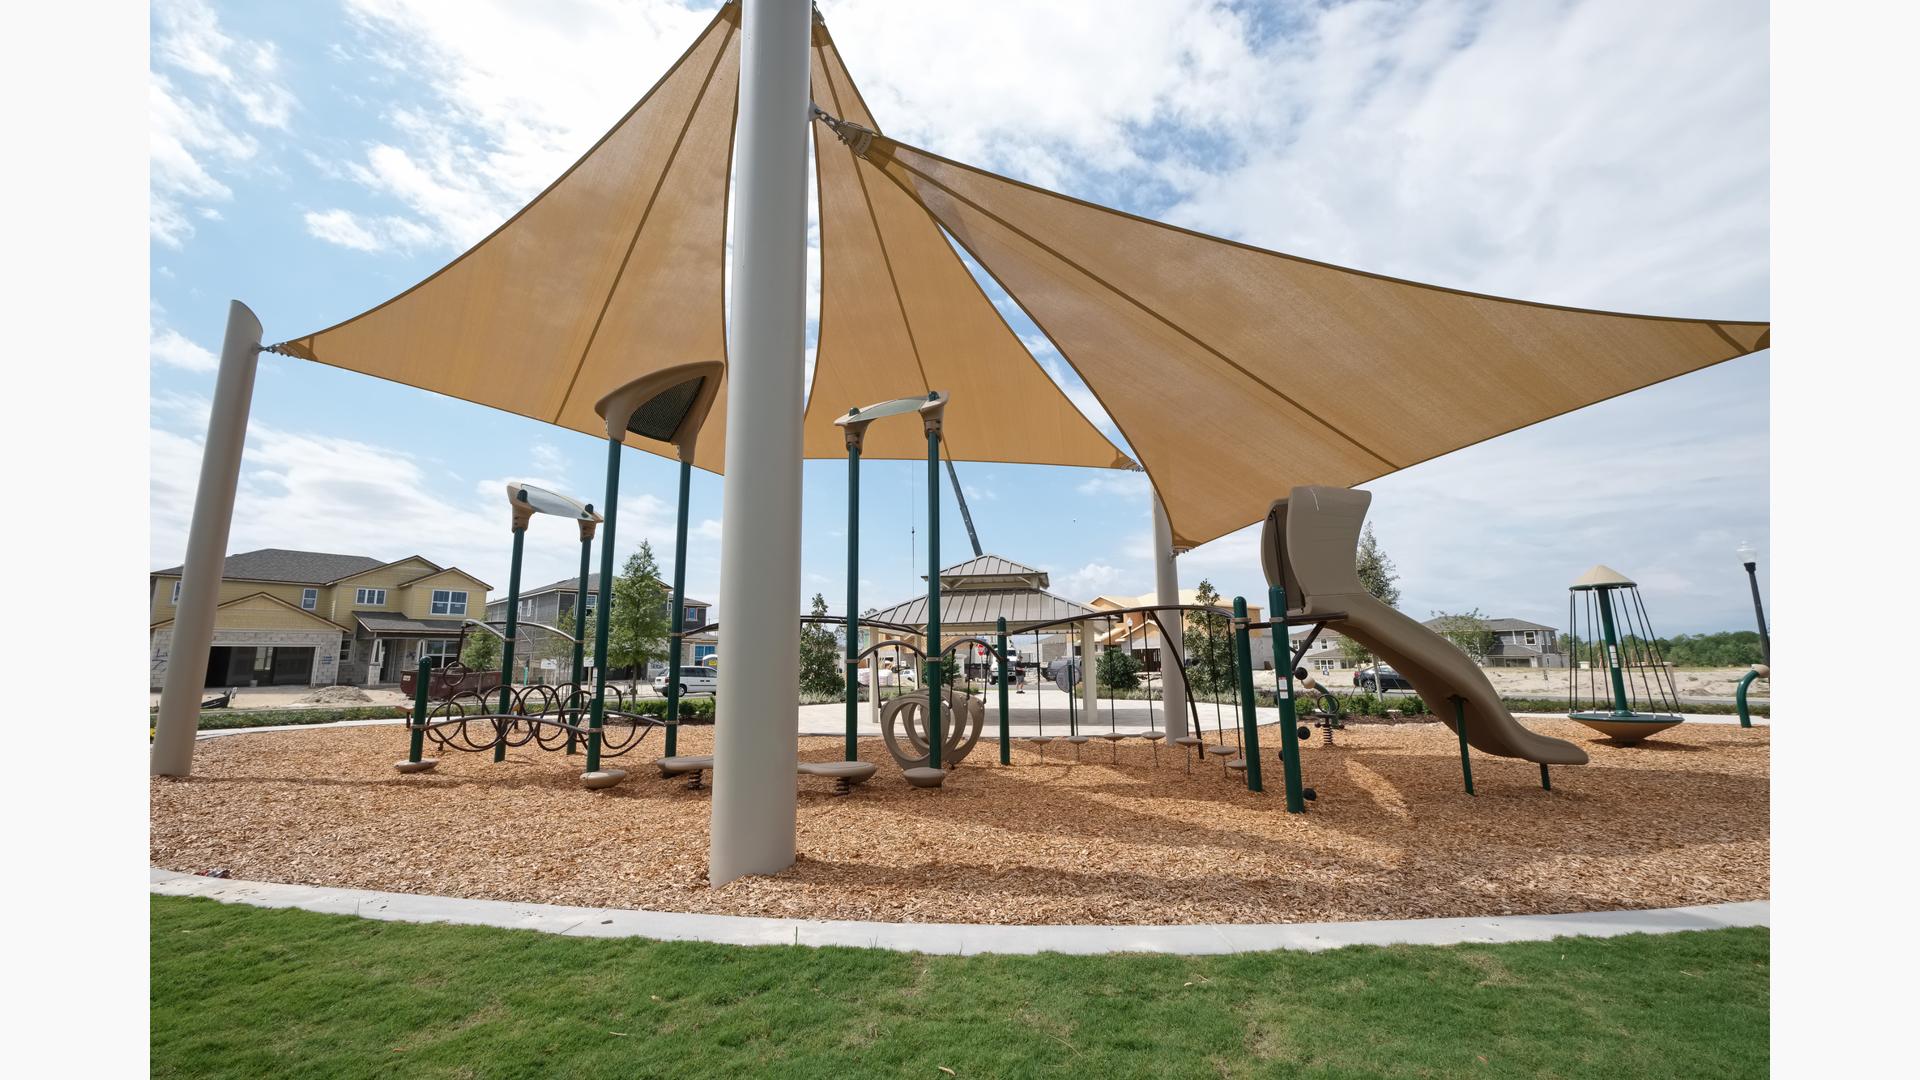 Shade sails covering playground.